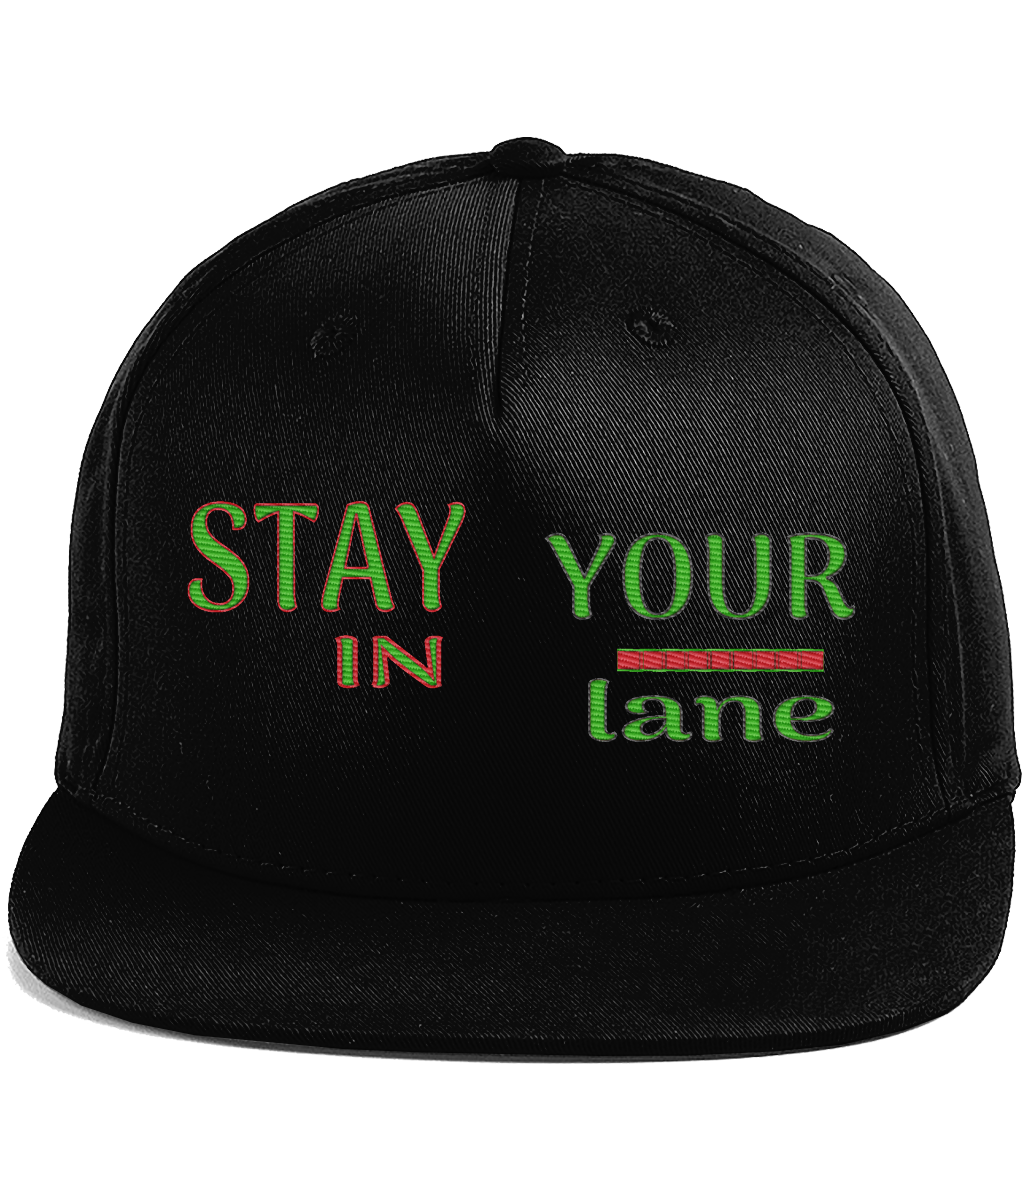 STAY IN YOUR lane 01-01 Designer Embroidered Cotton Twill Flat Brim Baseball Cap (9 colors)